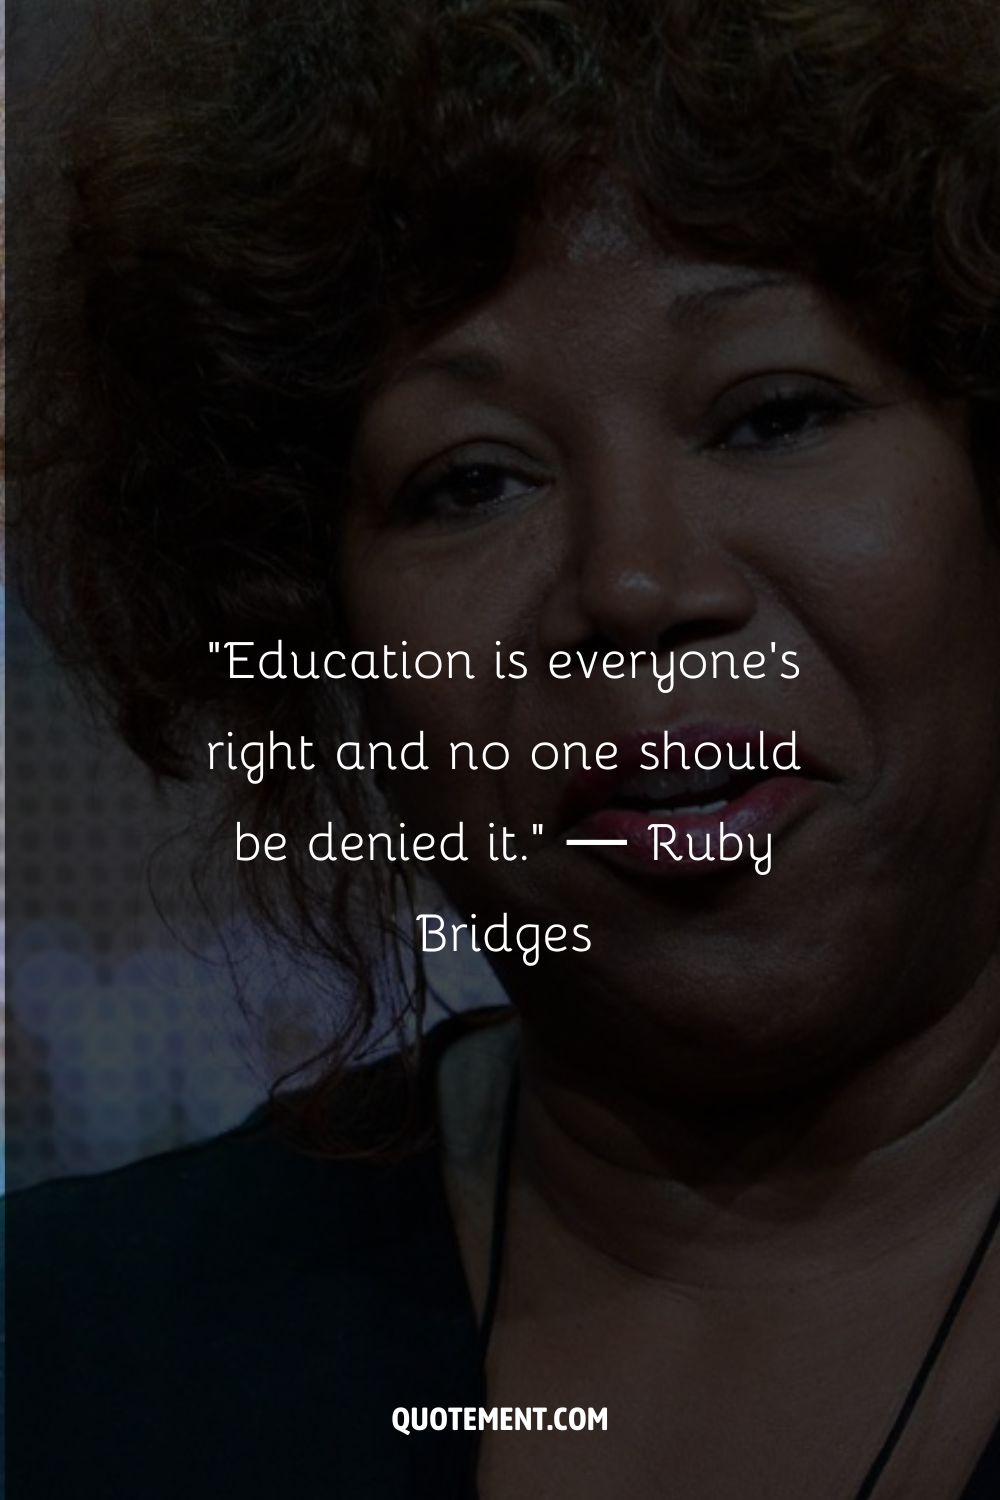 Education is everyone’s right and no one should be denied it